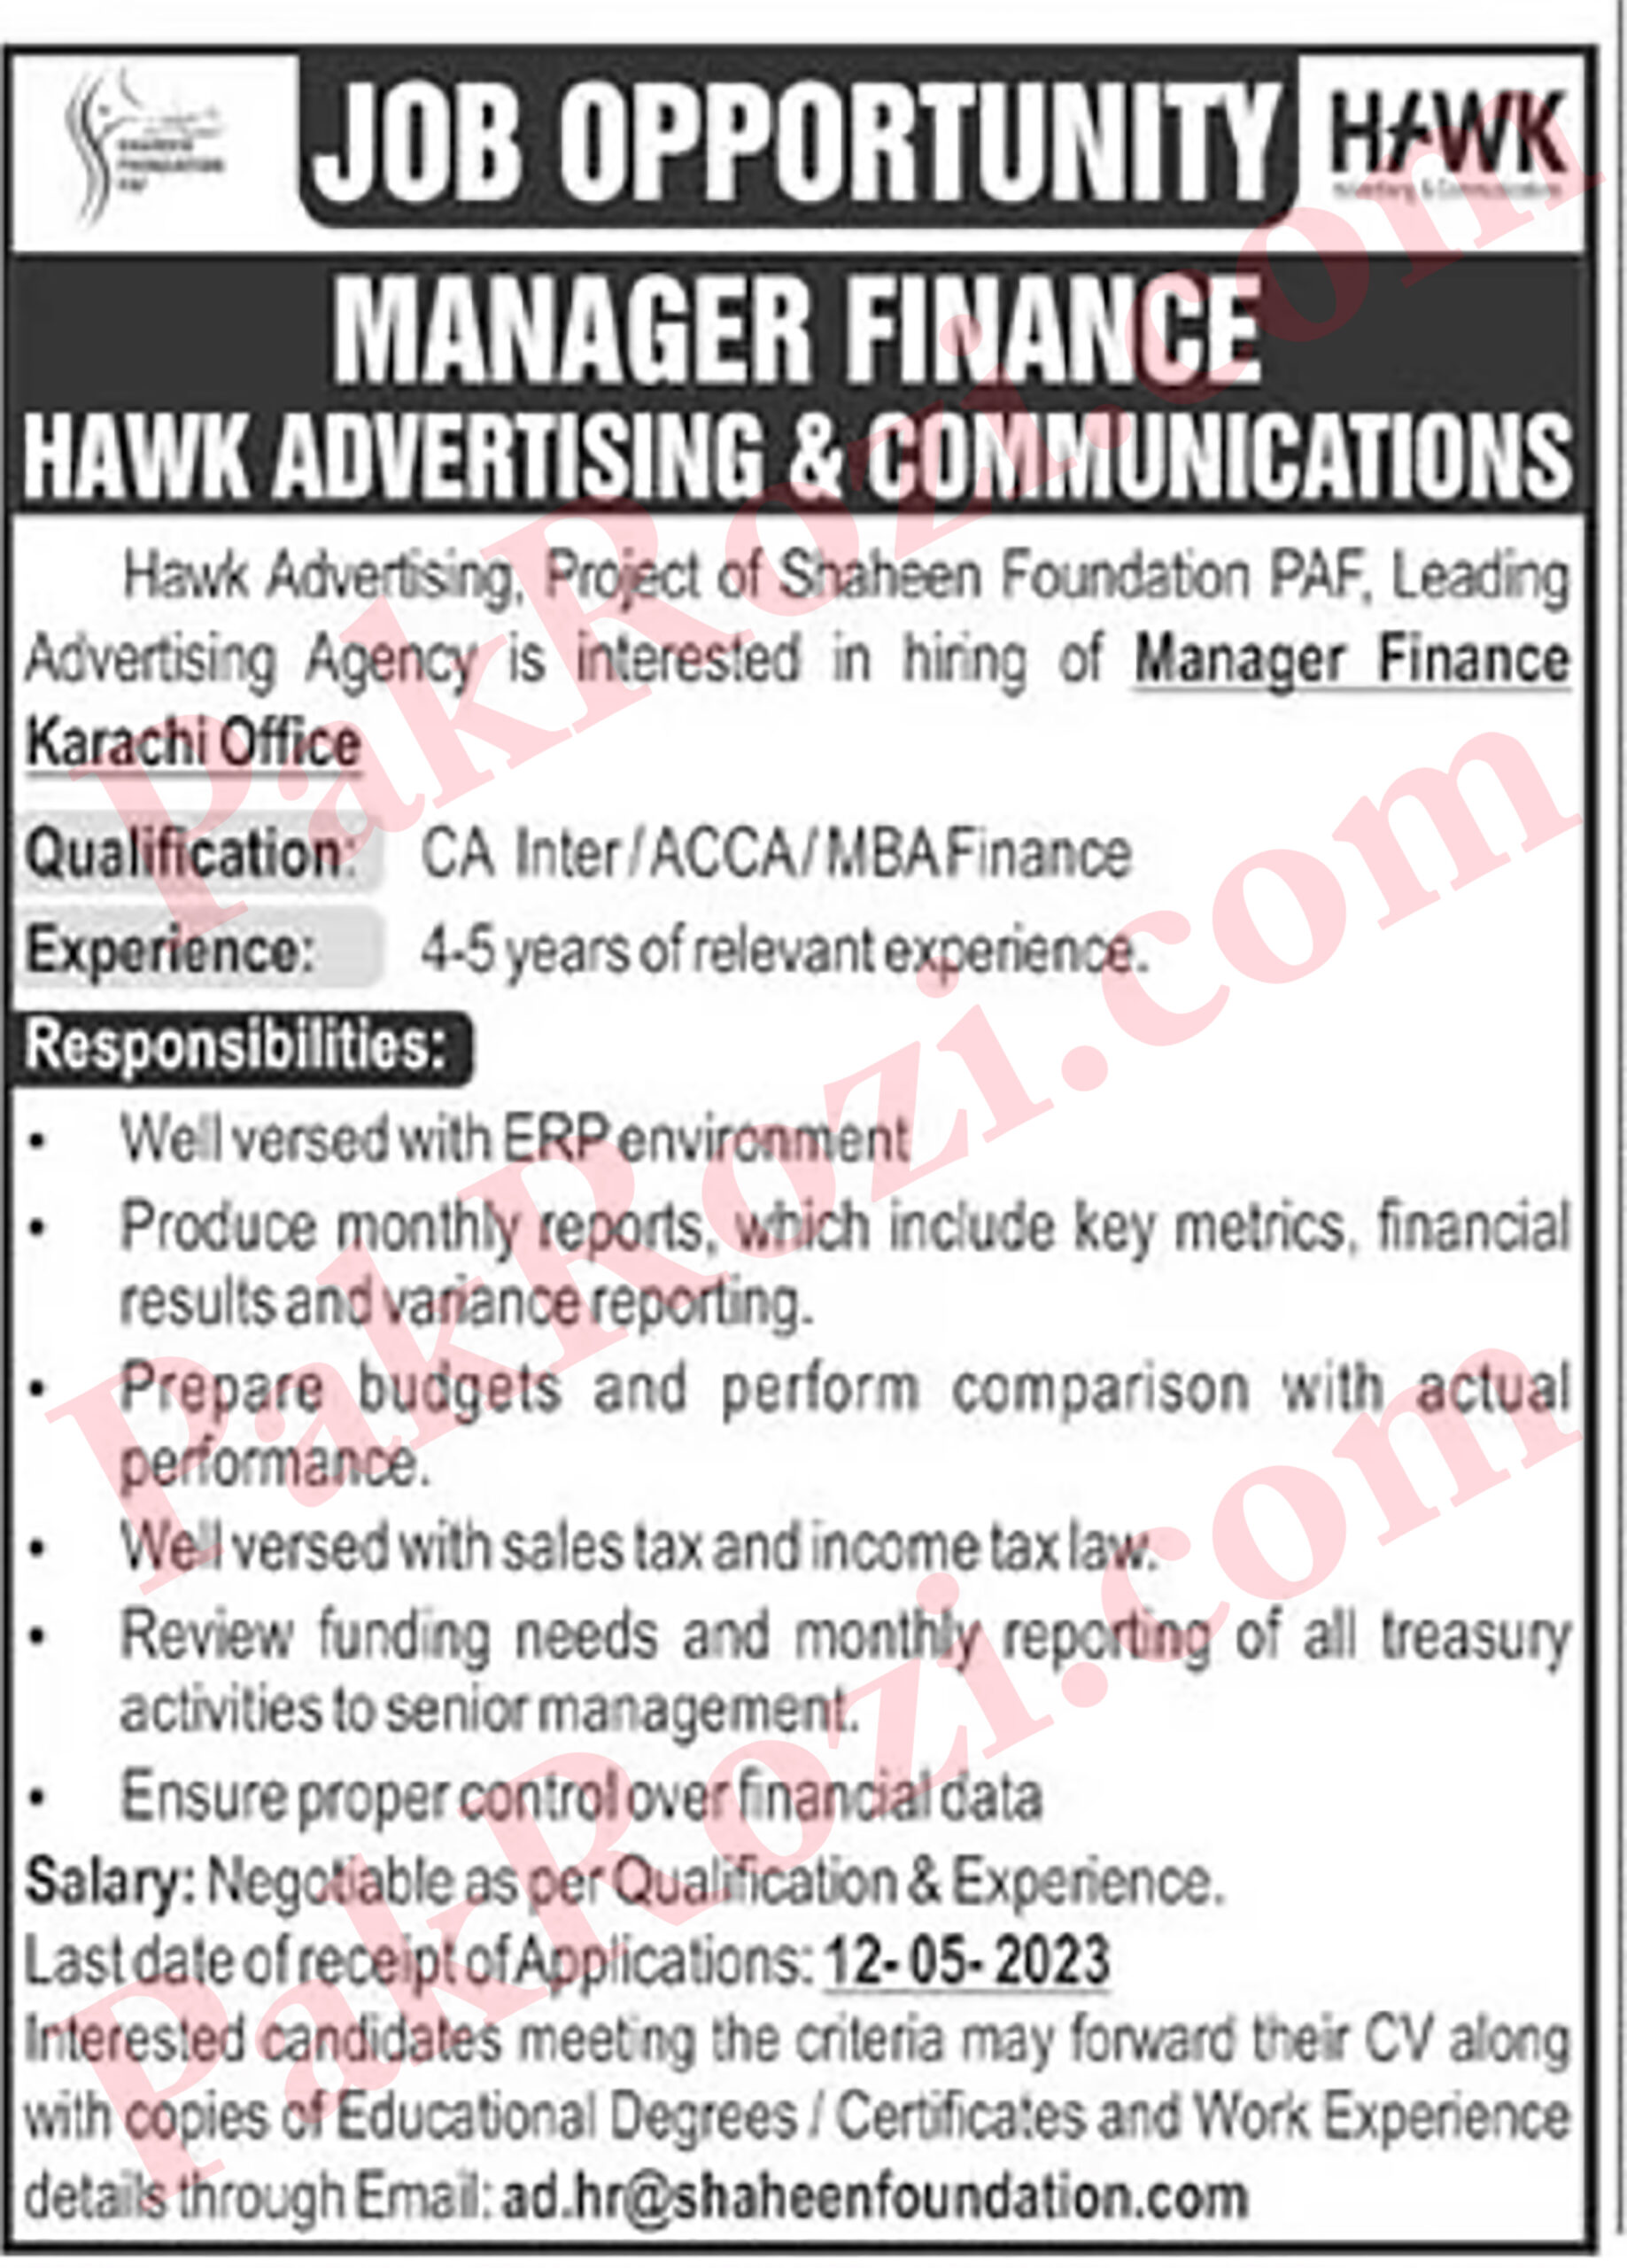 Manager Finance Position Available at Hawk Advertising!